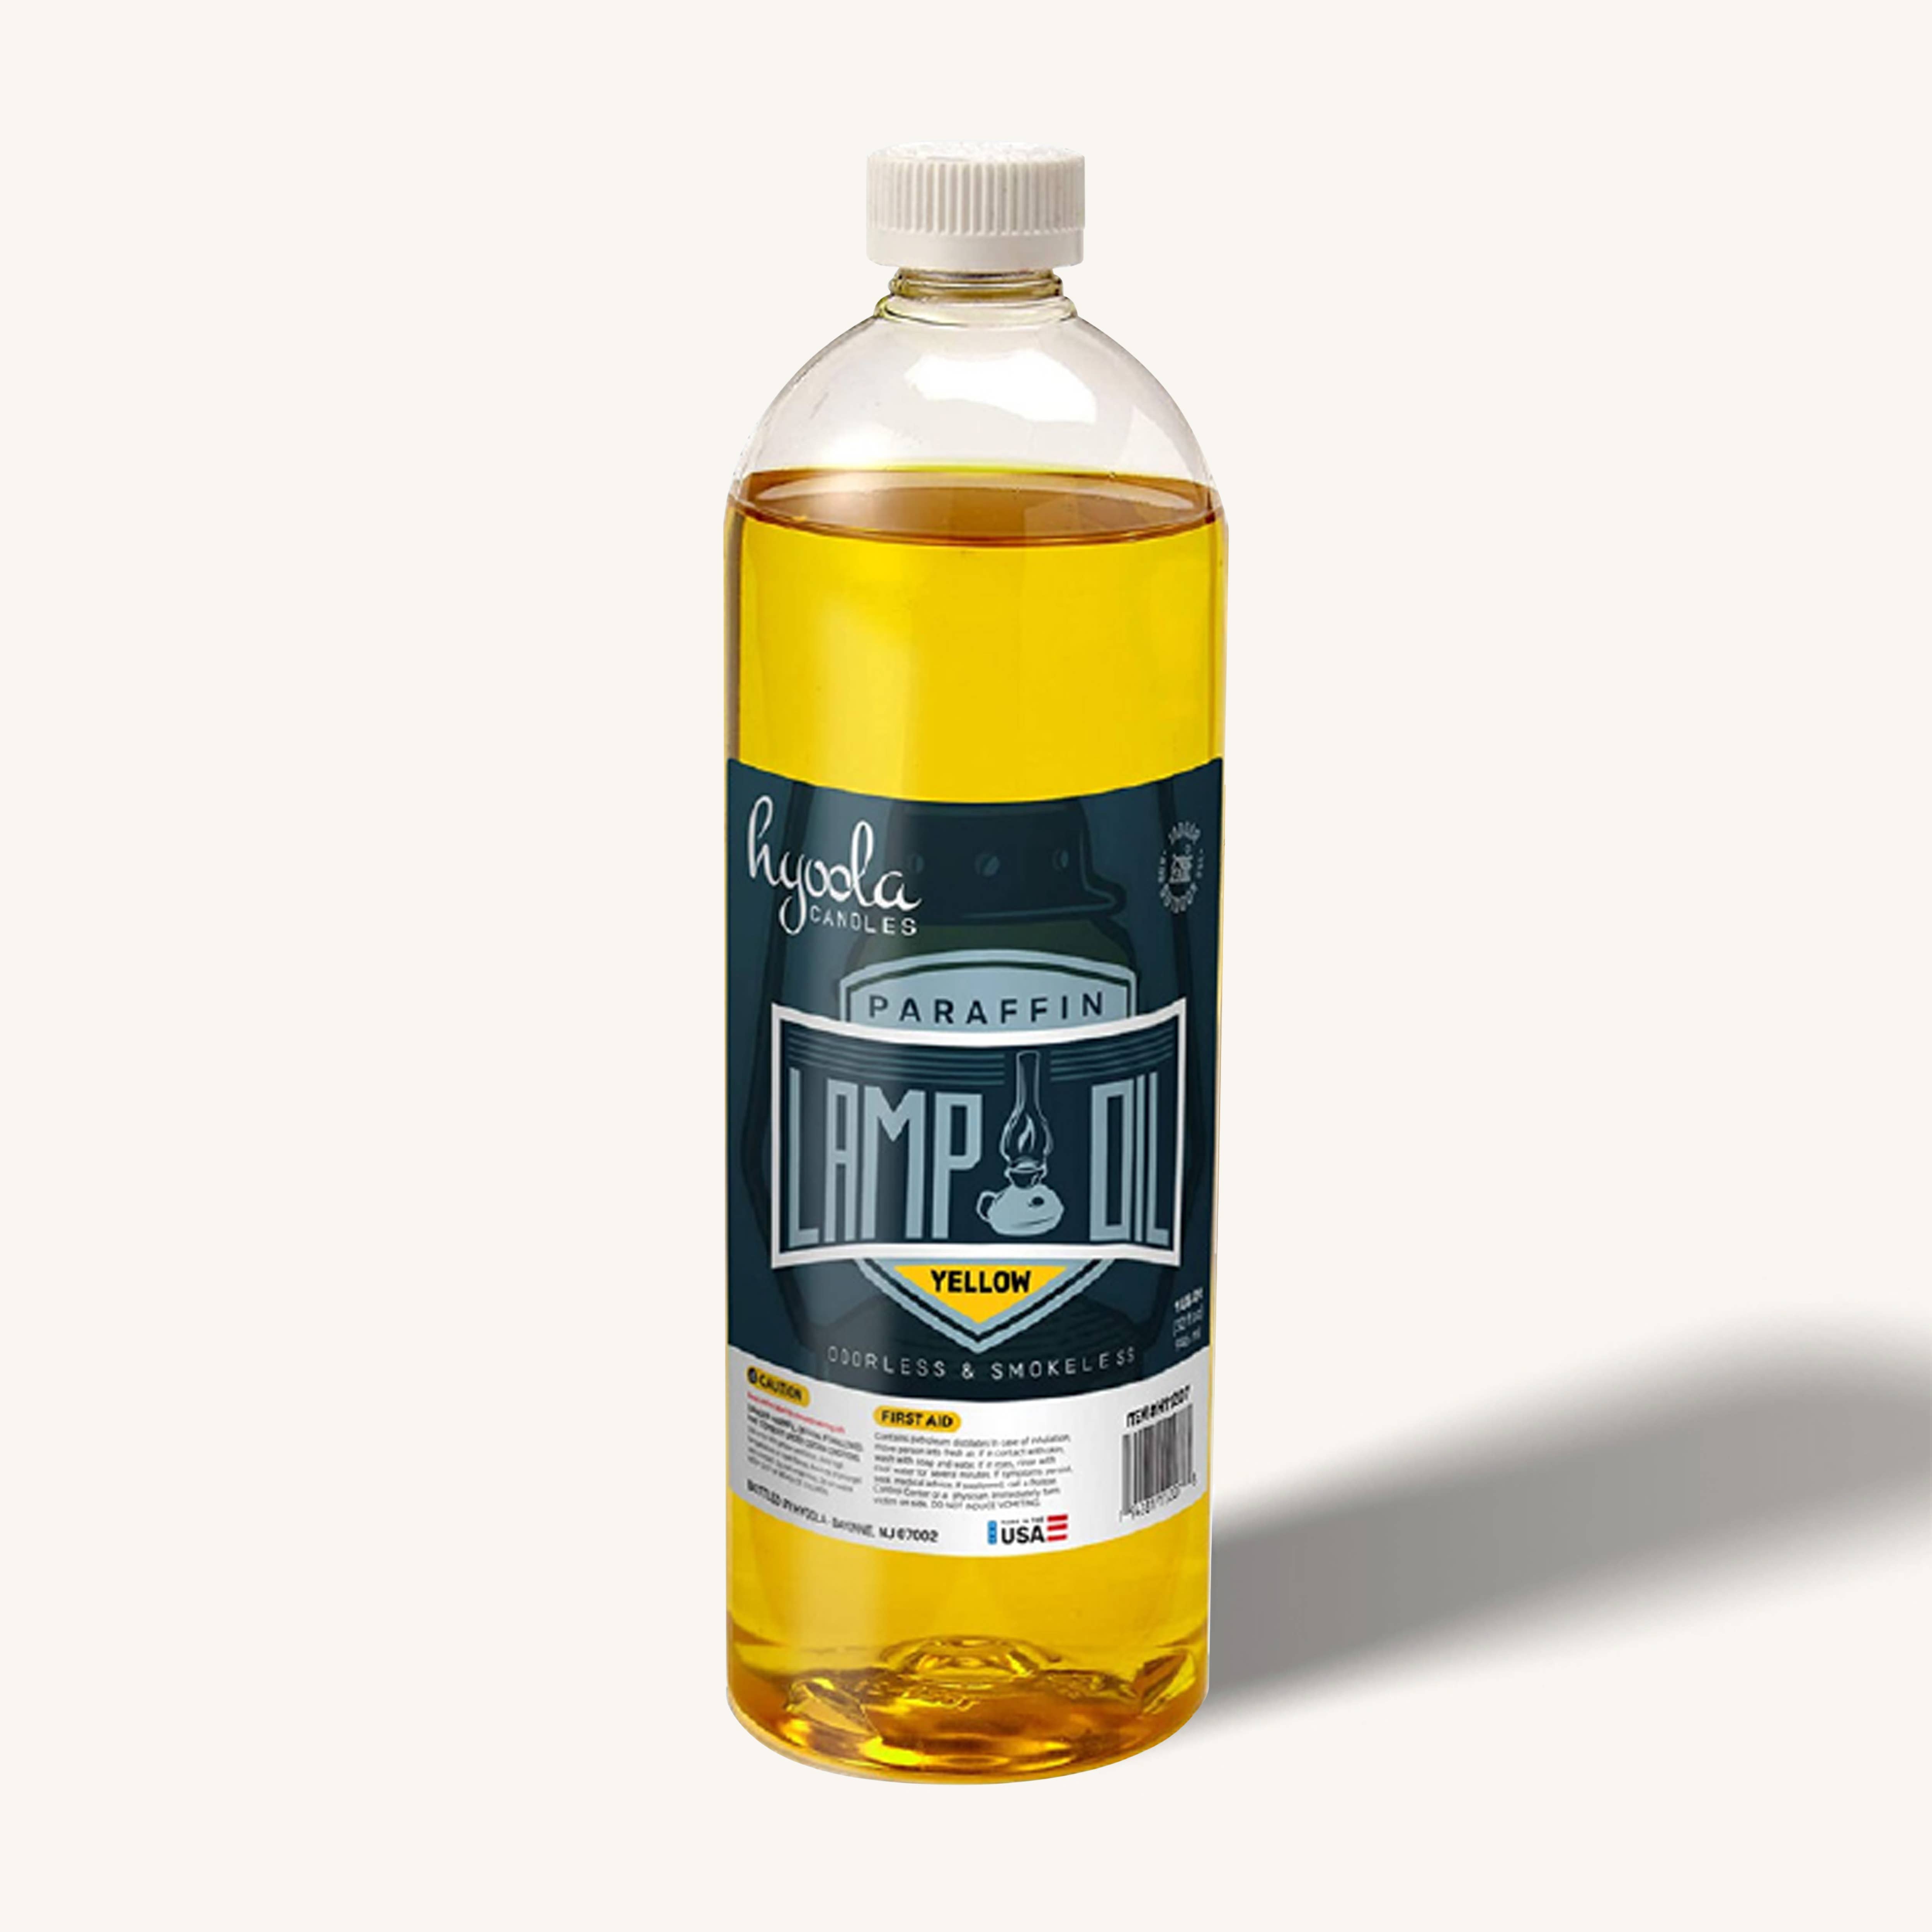 Paraffin Lamp Oil - Yellow - 32 Ounces